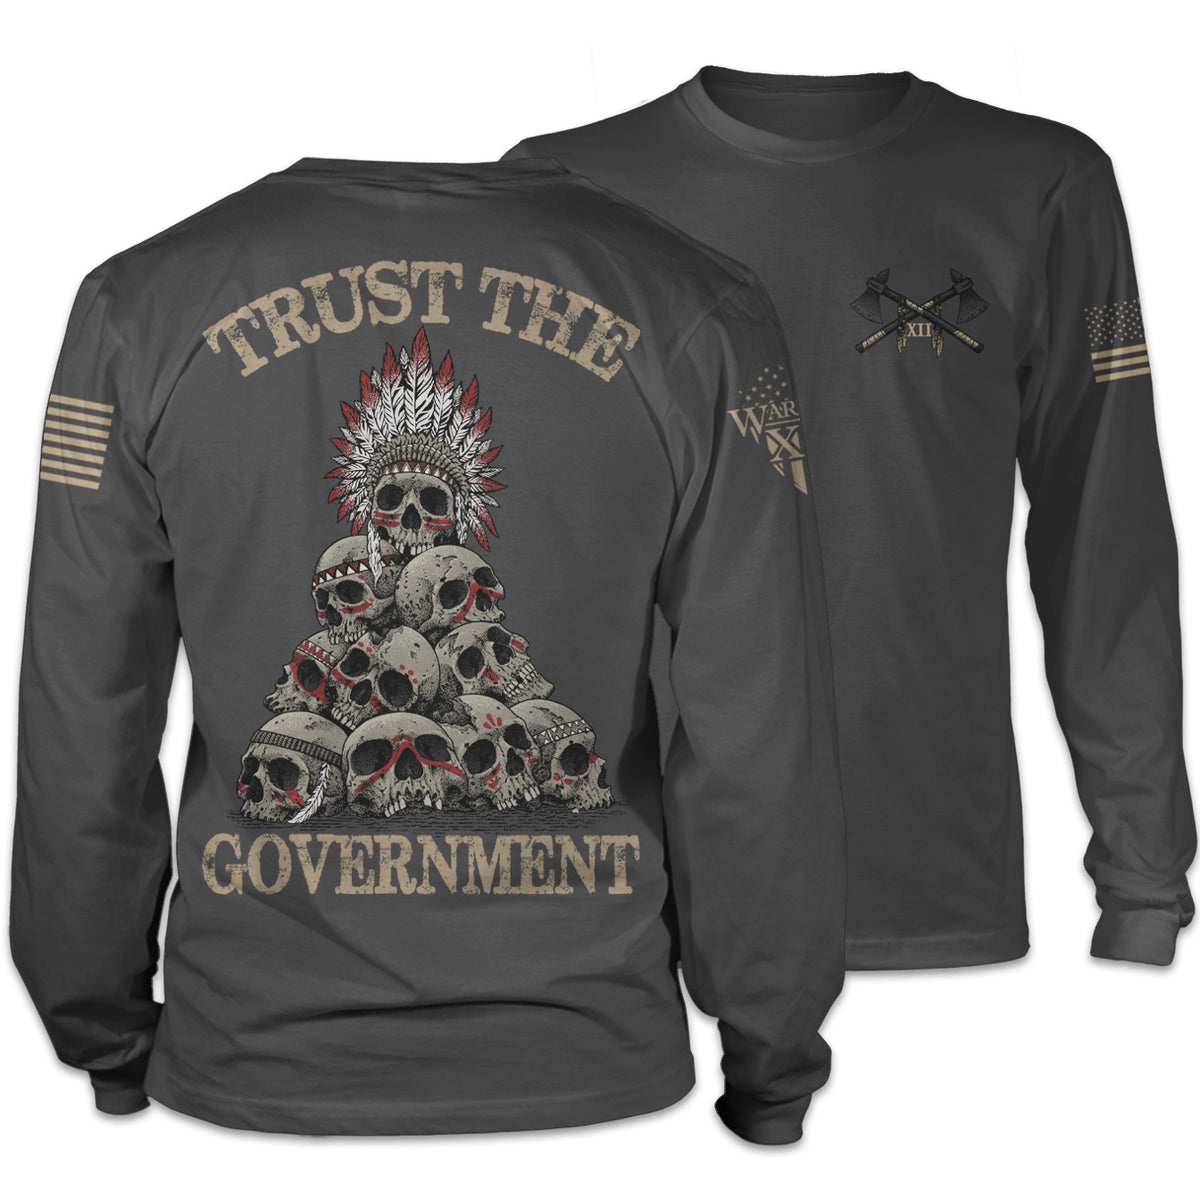 Front and back dark grey long sleeve shirt with the words "Trust the government" printed on the shirt.